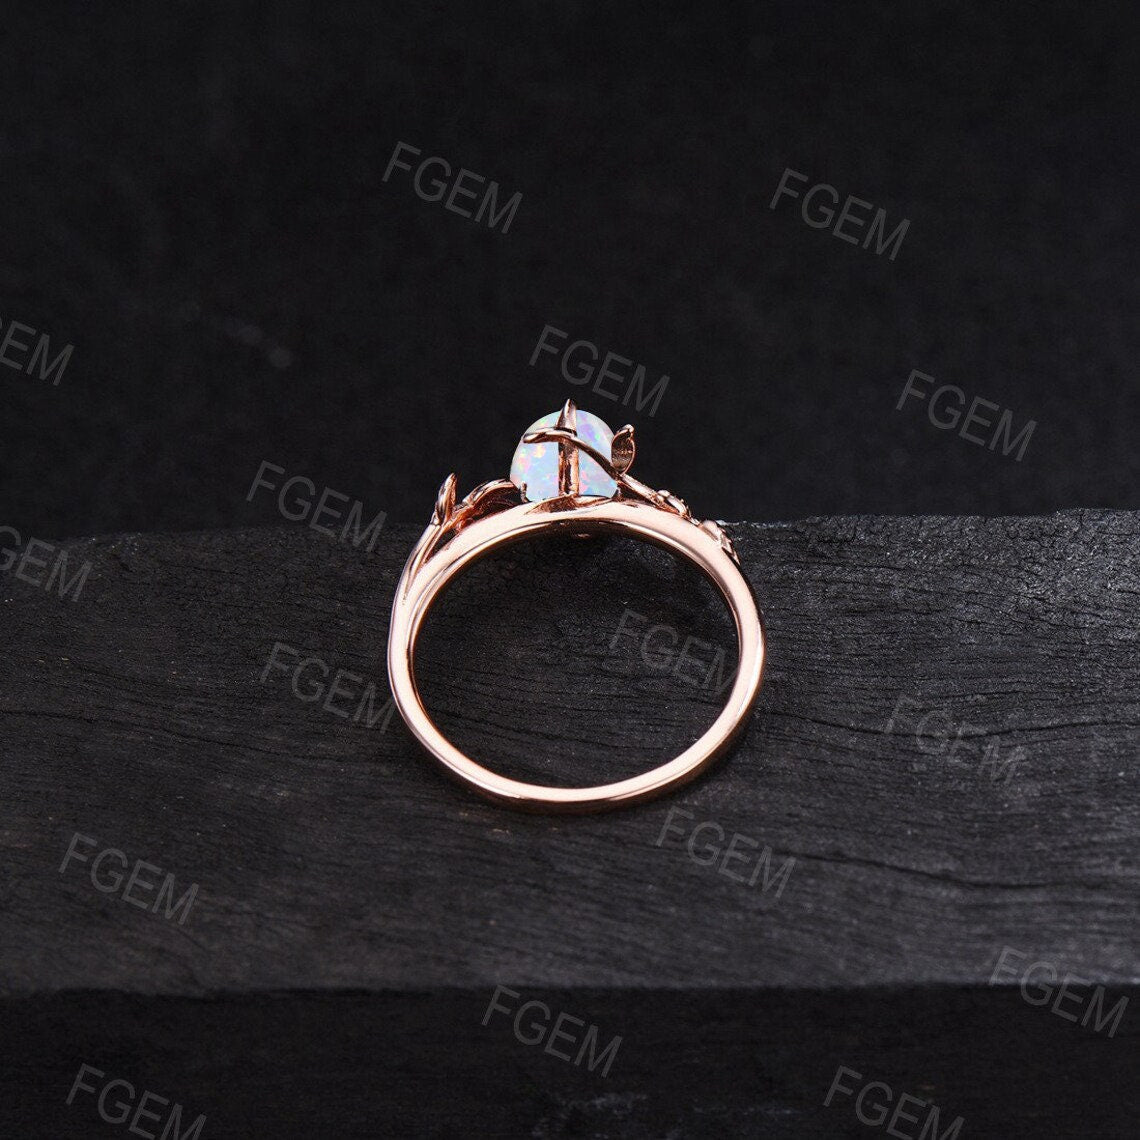 Twig Opal Engagement Rings 10K/14K/18K Rose Gold 1.25ct Pear Shaped White Opal Wedding Rings Cluster Moissanite Branch Nature Wedding Ring